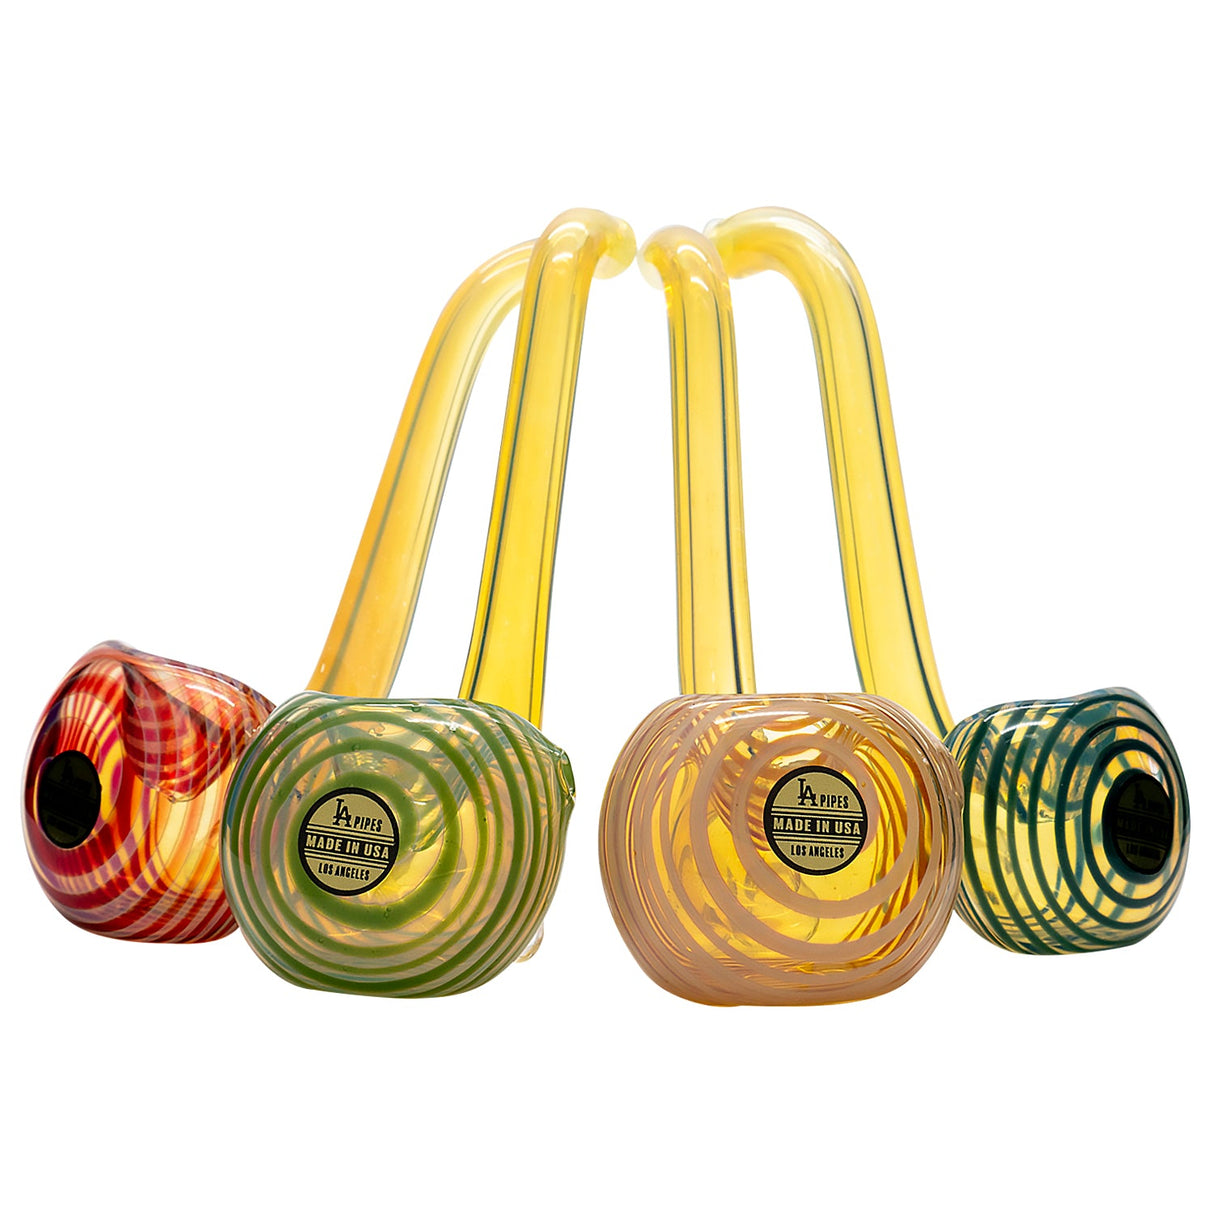 LA Pipes "Flaco" Skinny Glass Sherlock Pipes in various swirl designs, front view